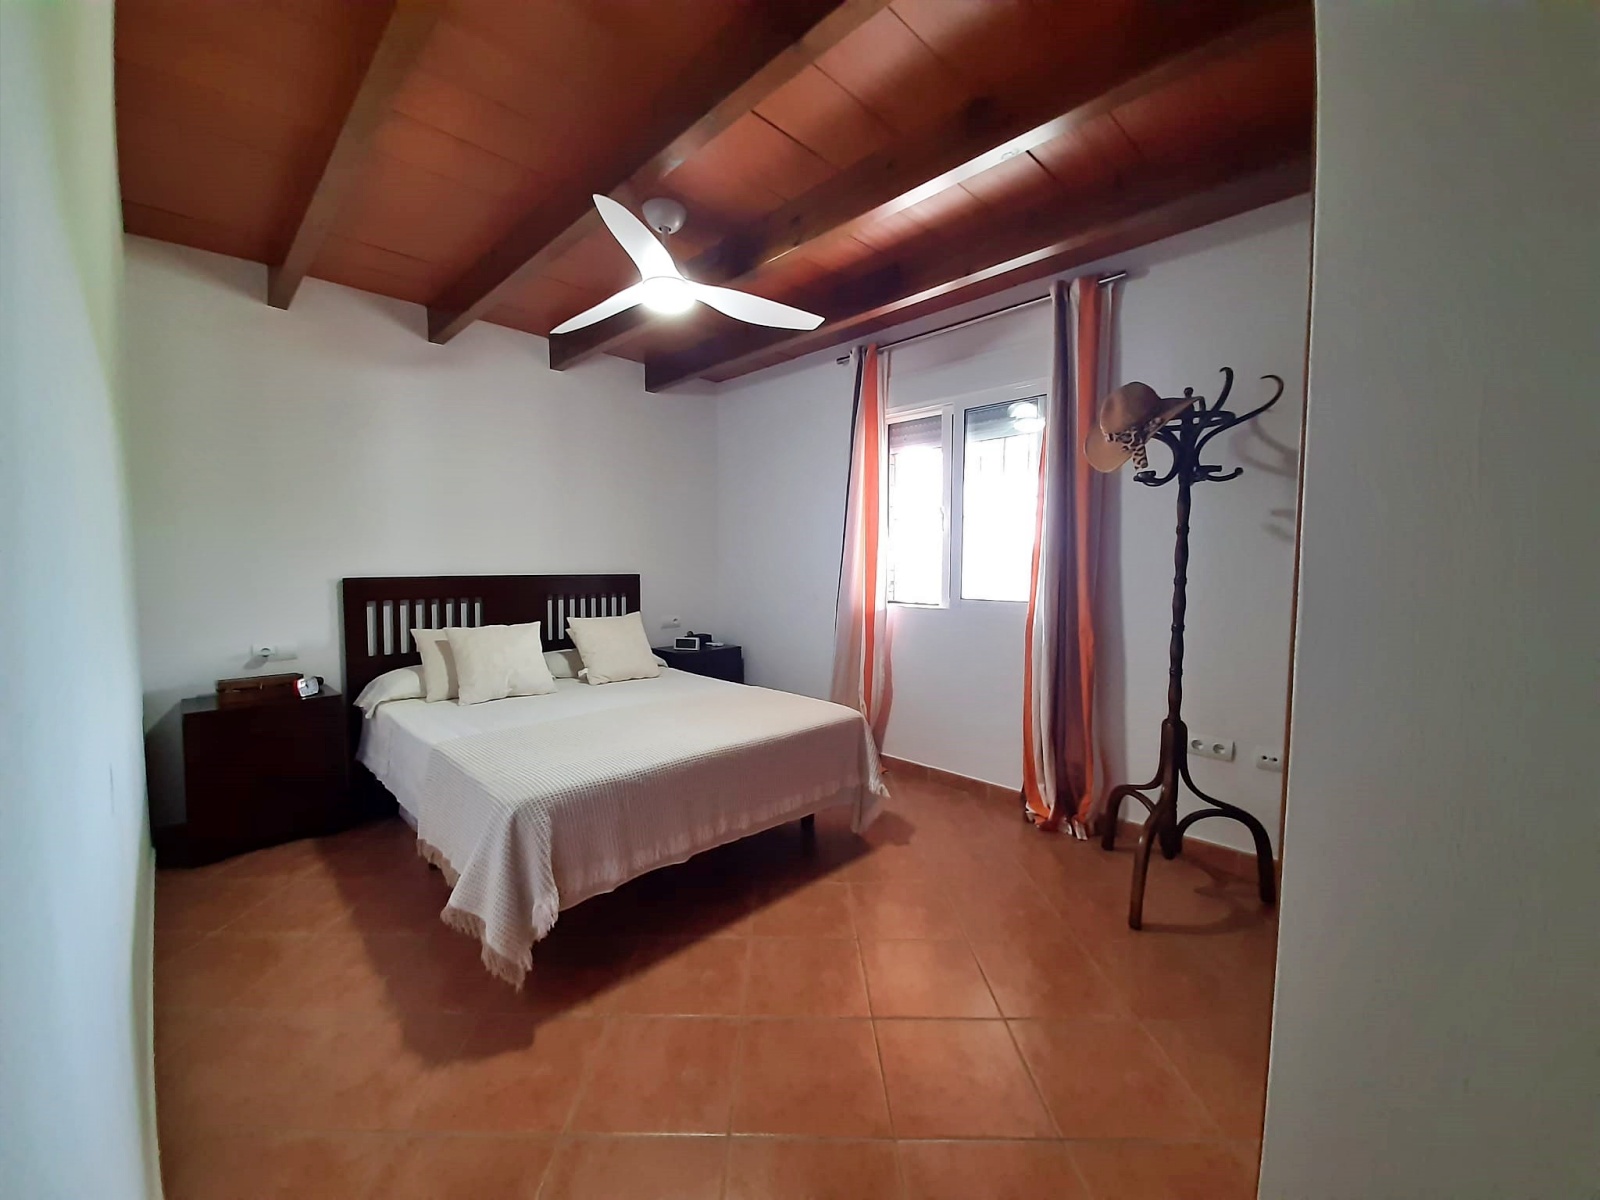 Detached finca available for winter rental